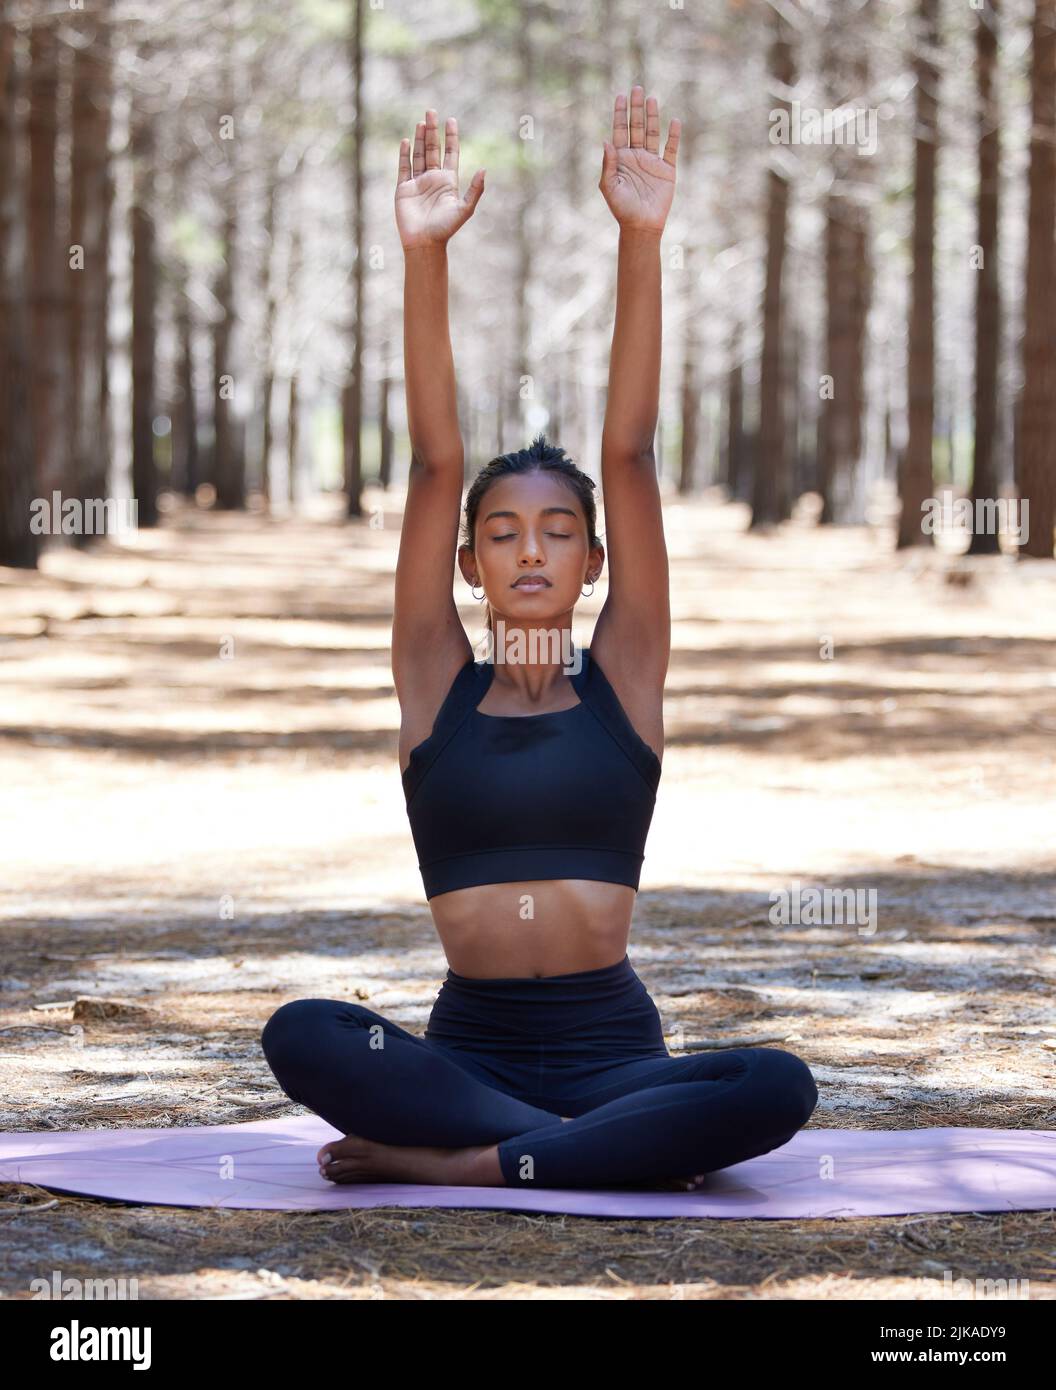 https://c8.alamy.com/comp/2JKADY9/gathering-good-energy-from-the-universe-an-attractive-young-woman-sitting-alone-on-a-yoga-mat-outdoors-and-meditating-2JKADY9.jpg